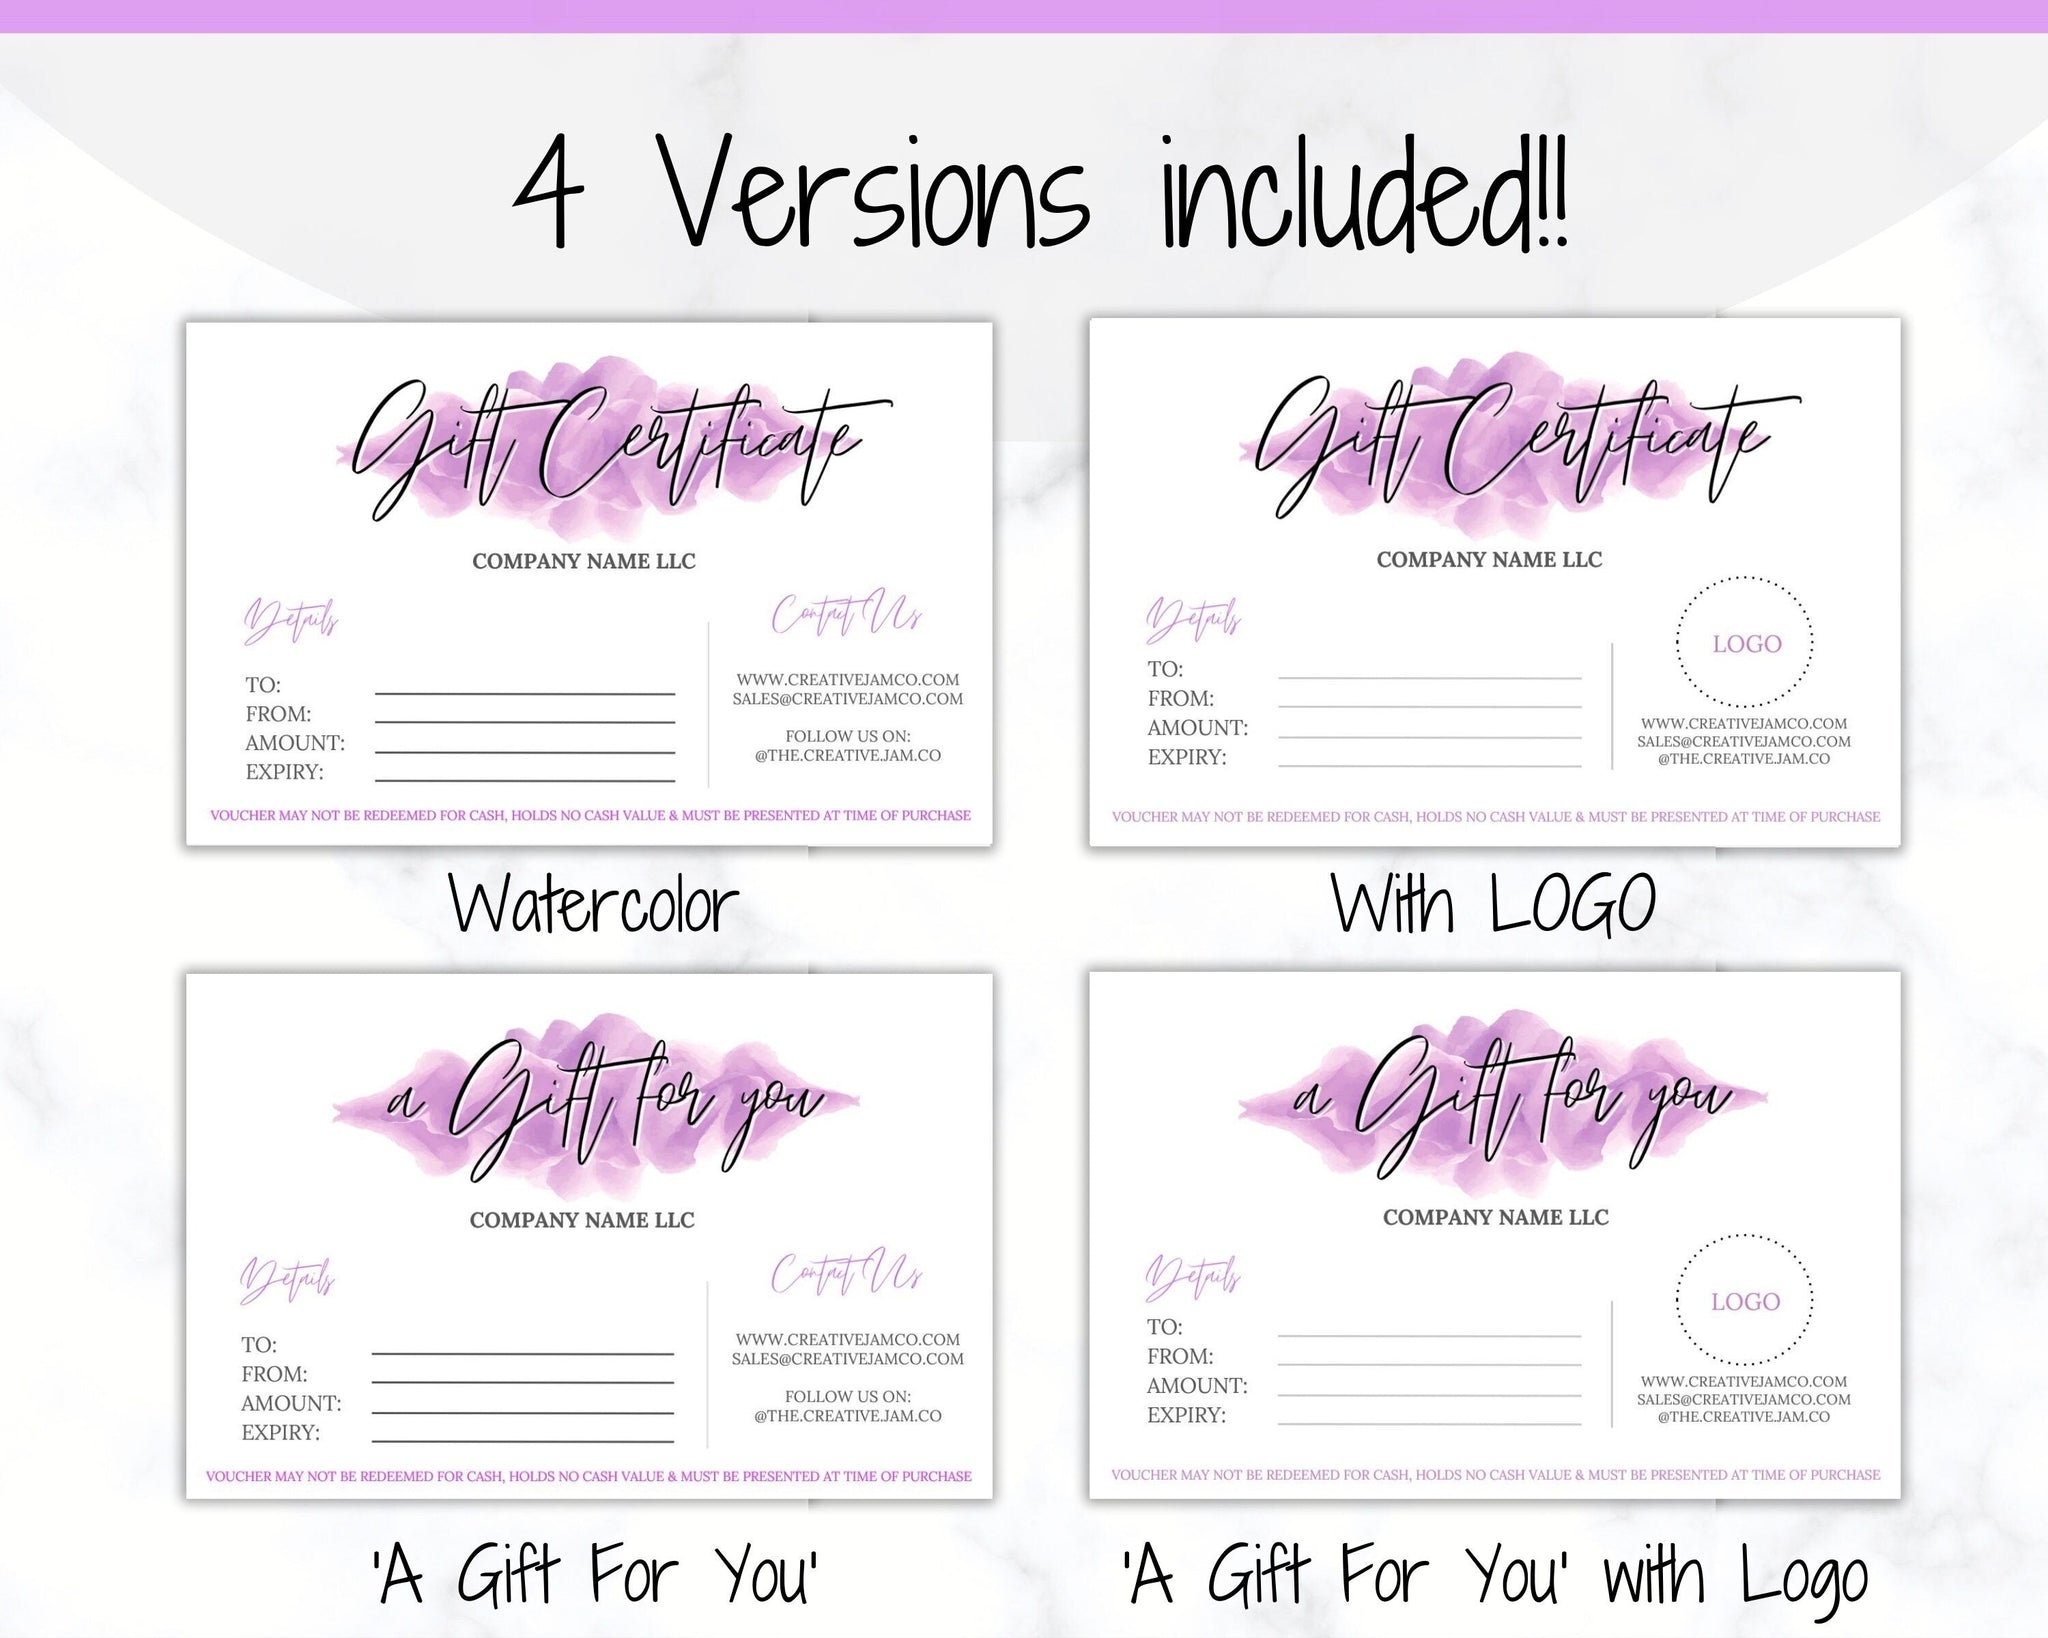 Gift Certificate Design Template in PSD, Word, Publisher, Illustrator,  InDesign